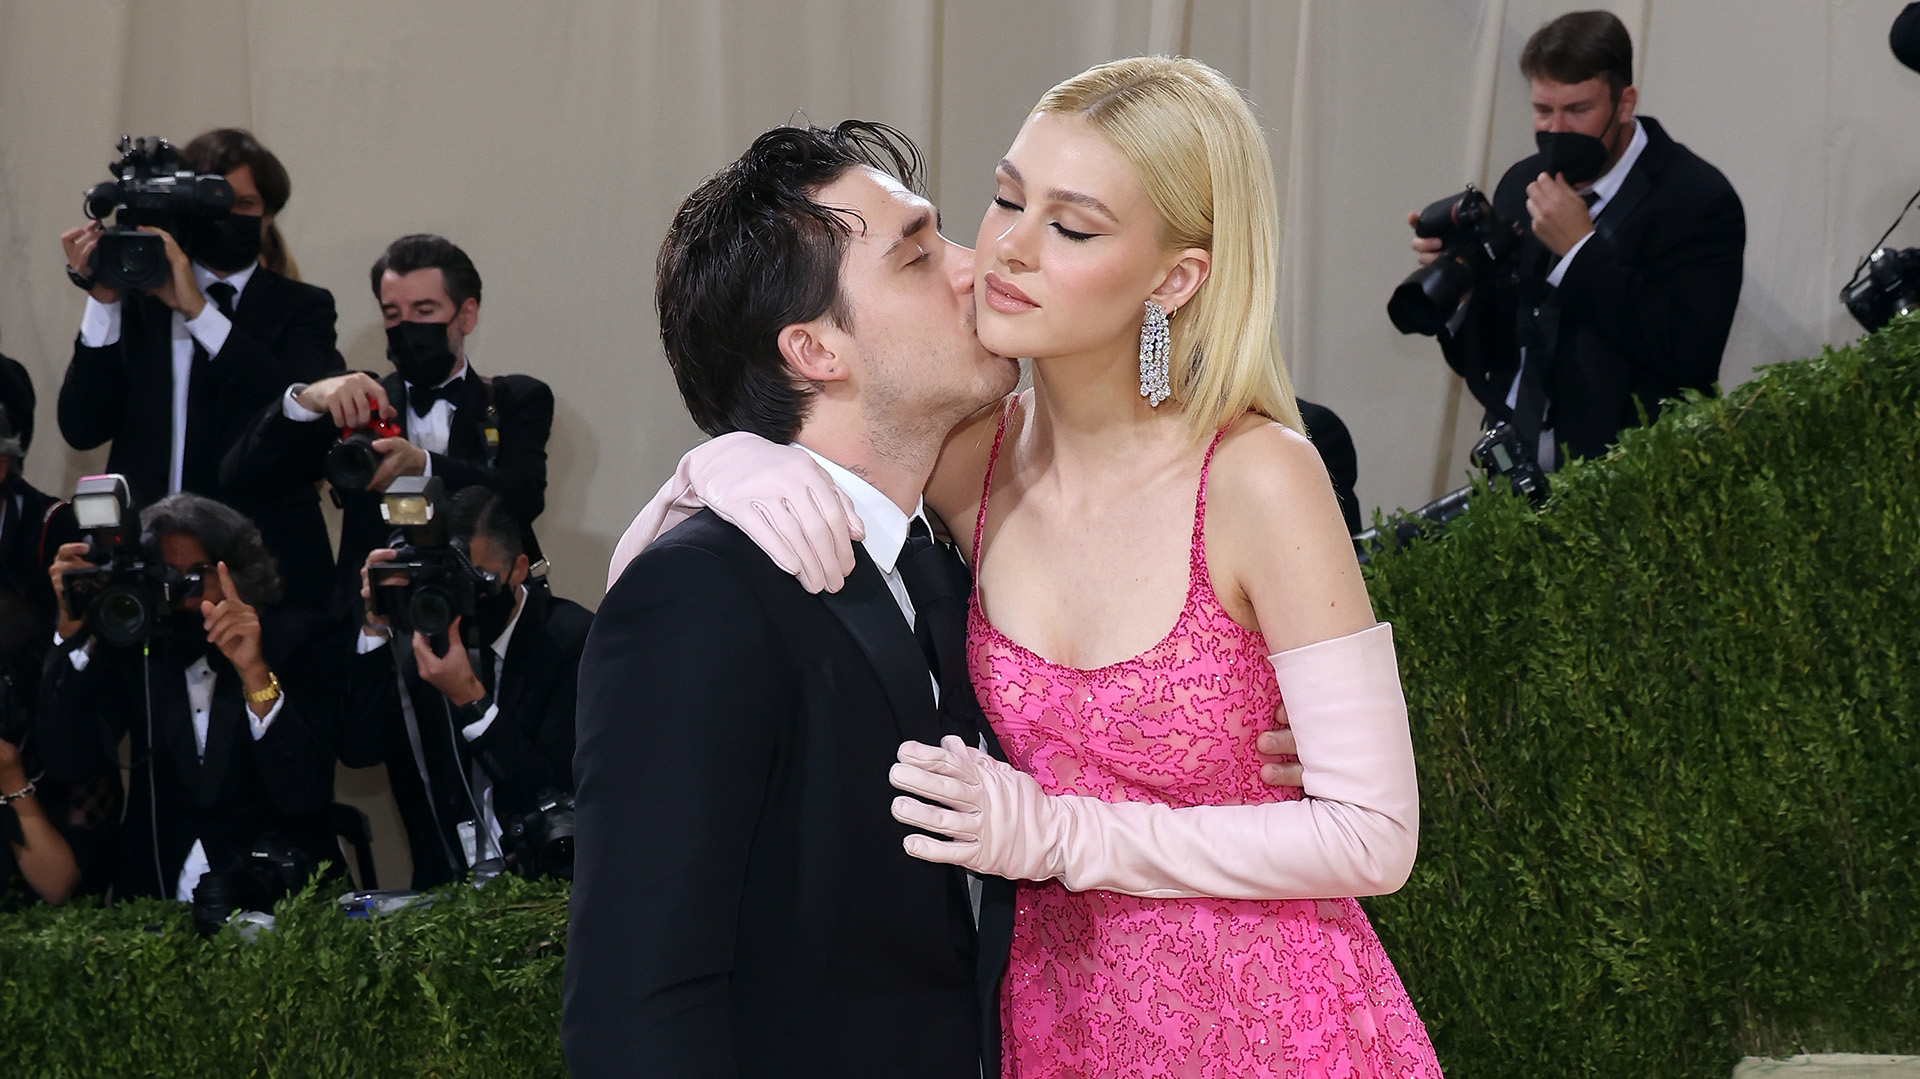 Nicola Peltz and Brooklyn Beckham are getting married on Saturday, April 9, in Florida (Taylor Hill/WireImage)